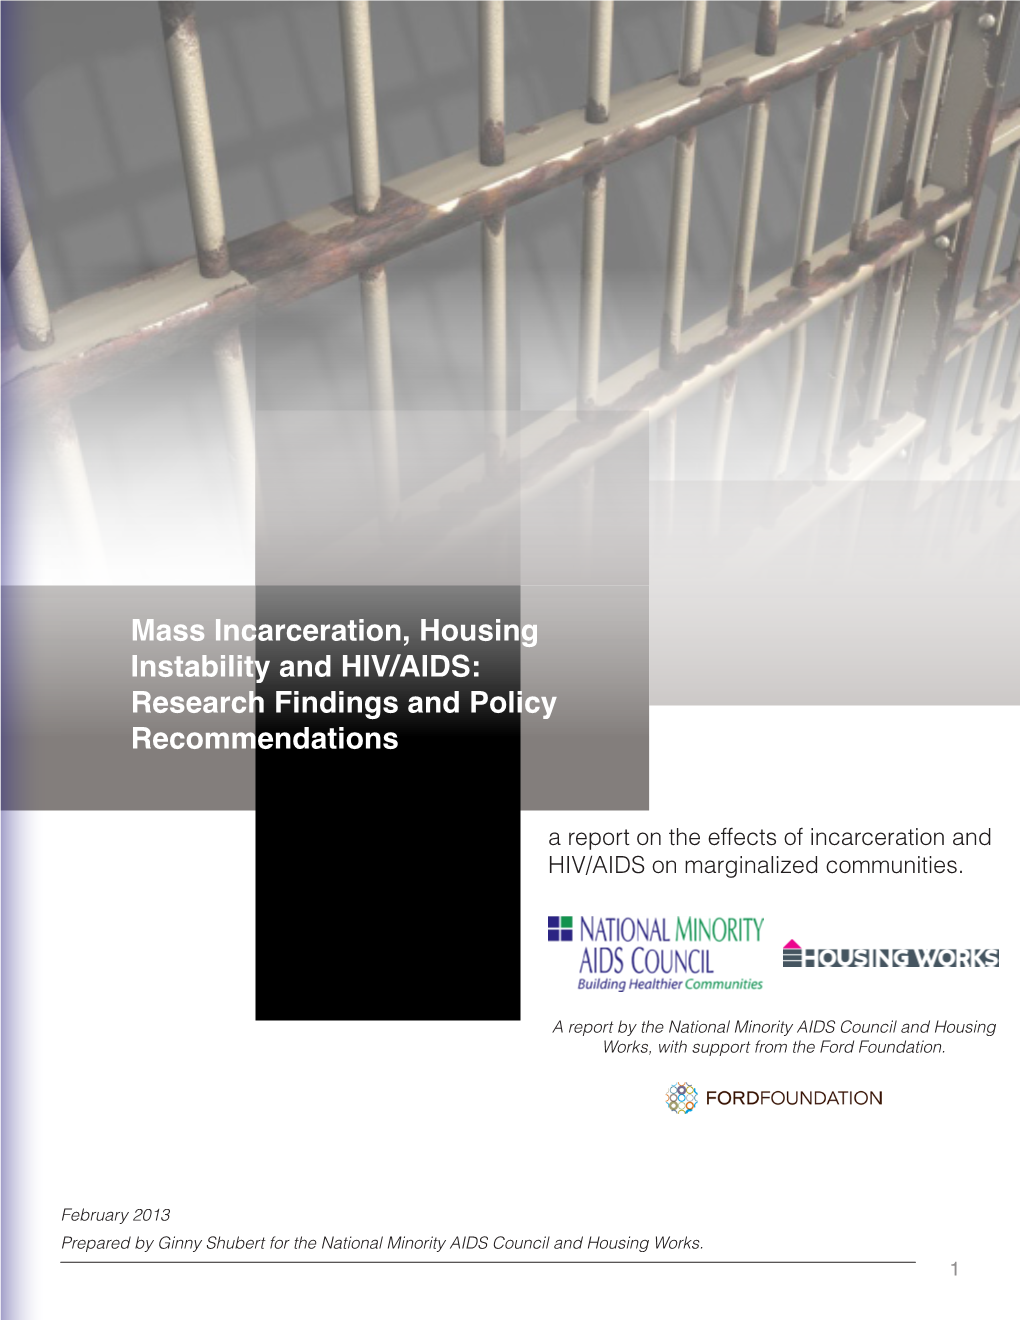 Mass Incarceration, Housing Instability and HIV/AIDS: Research Findings and Policy Recommendations